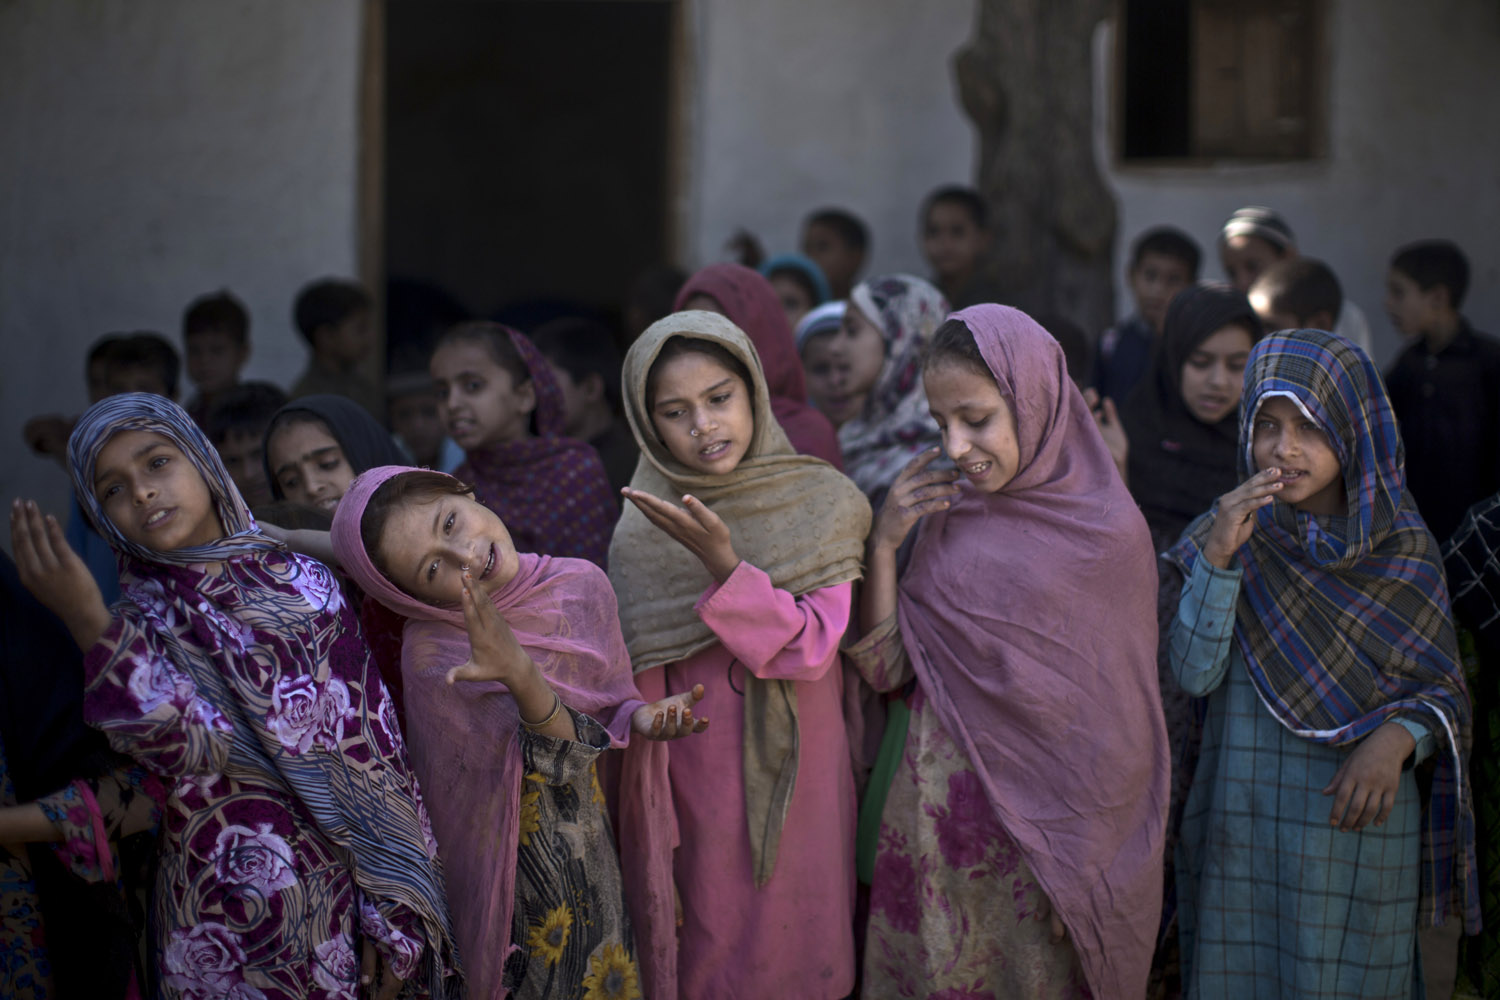 Oct. 14, 2013. Pakistani schoolgirls, who were displaced with their families from Pakistan's tribal areas due to fighting between the Taliban and the army, sing with their teacher before starting their classes, at their makeshift school on the outskirts of Islamabad.